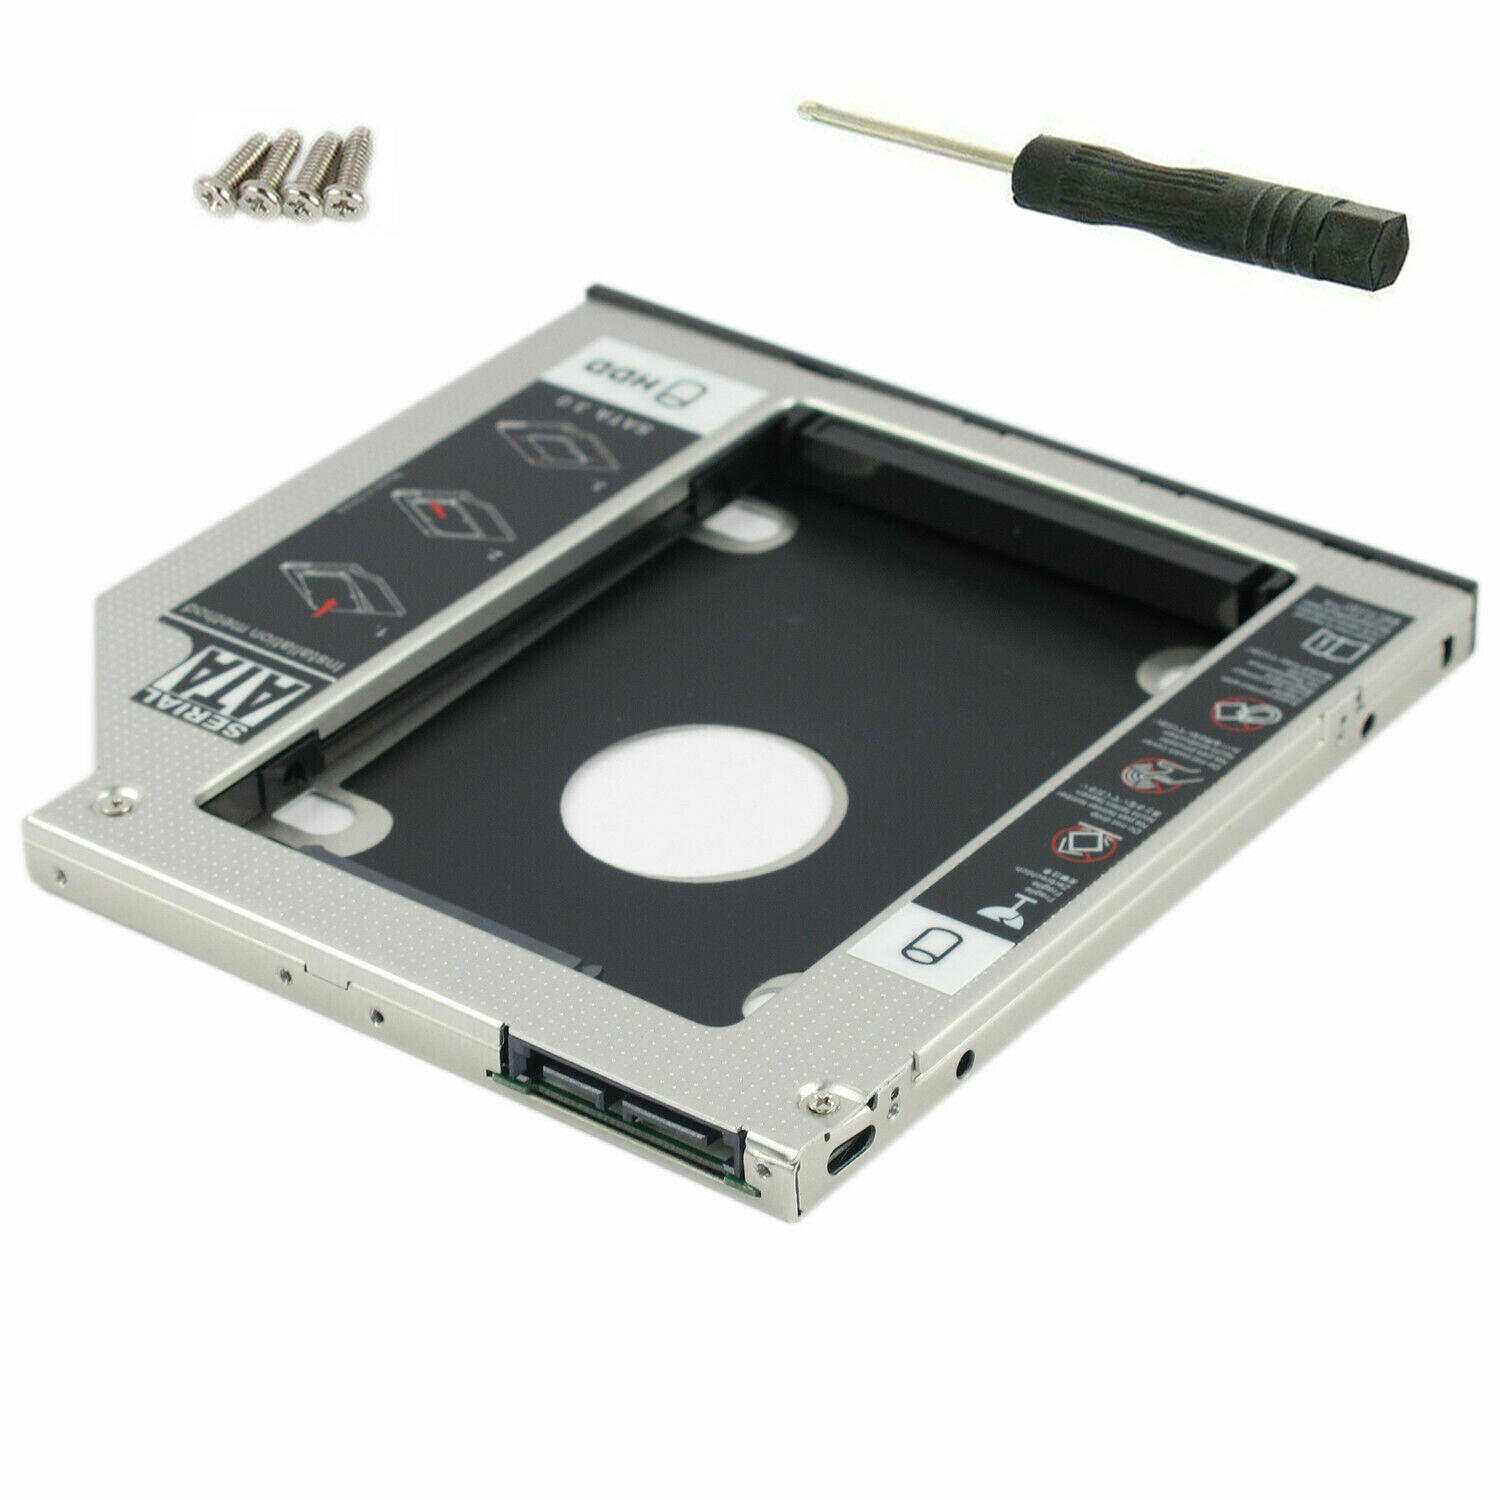 12.7mm Universal for SATA 2nd HDD SSD Hard Drive Caddy CD/DVD-ROM Optical Bay US